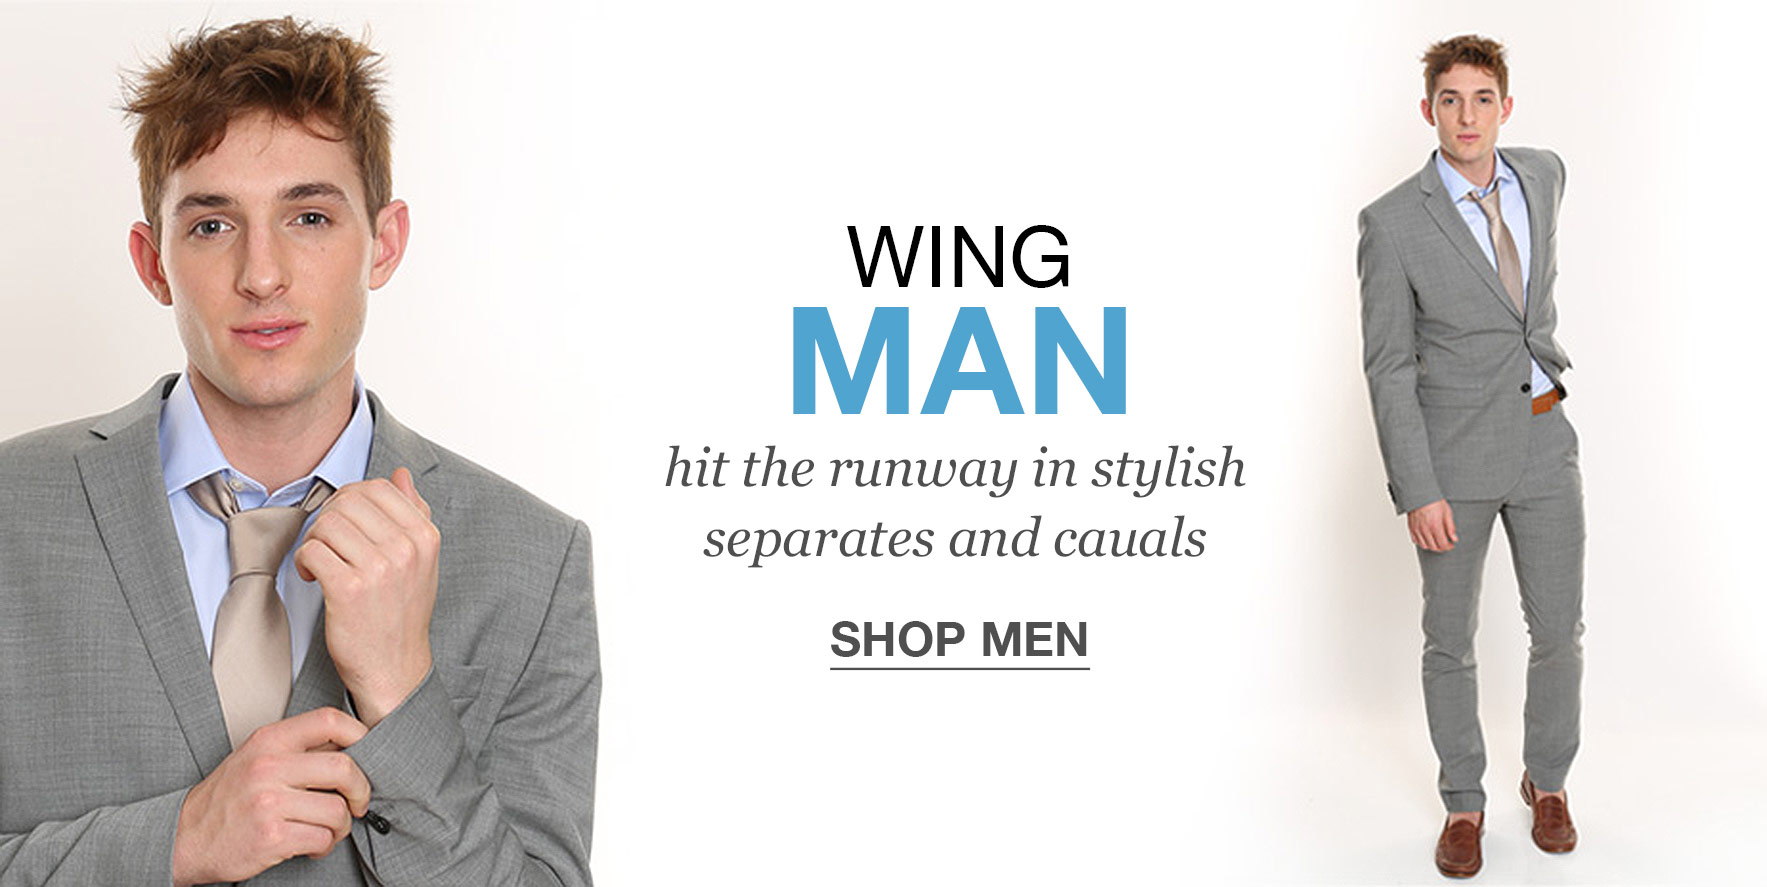 Wing man - hit the runway in stylish separates and casuals - Click to Shop Man